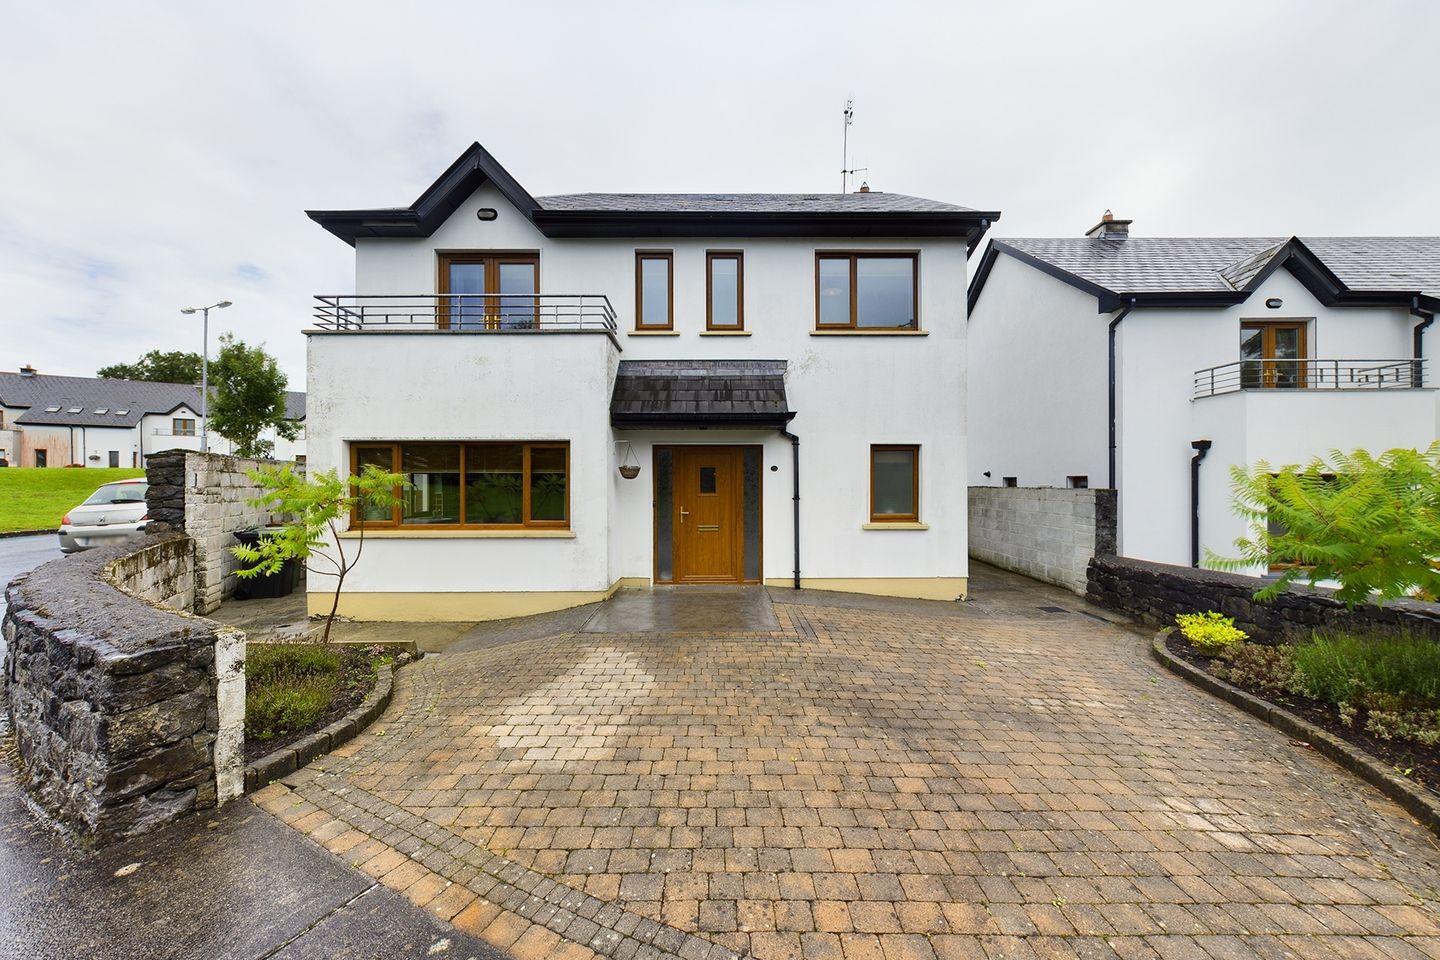 3 Blackberry Way, Craughwell, Co. Galway, H91XPK4